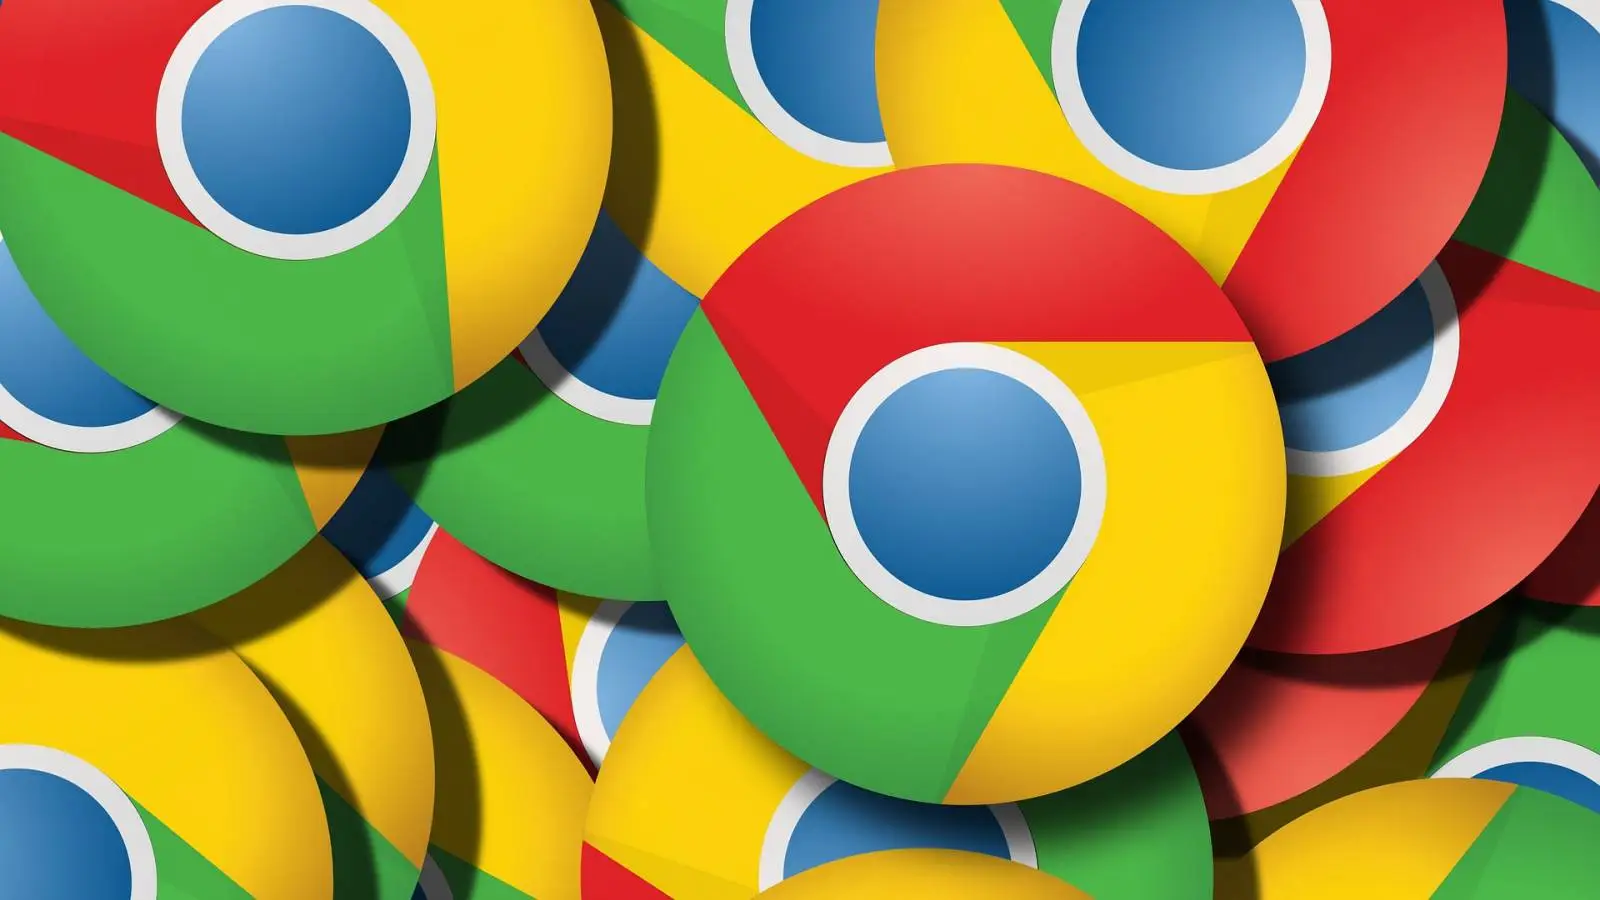 Google Chrome Update has been released on Phones and Tablets, which are the News